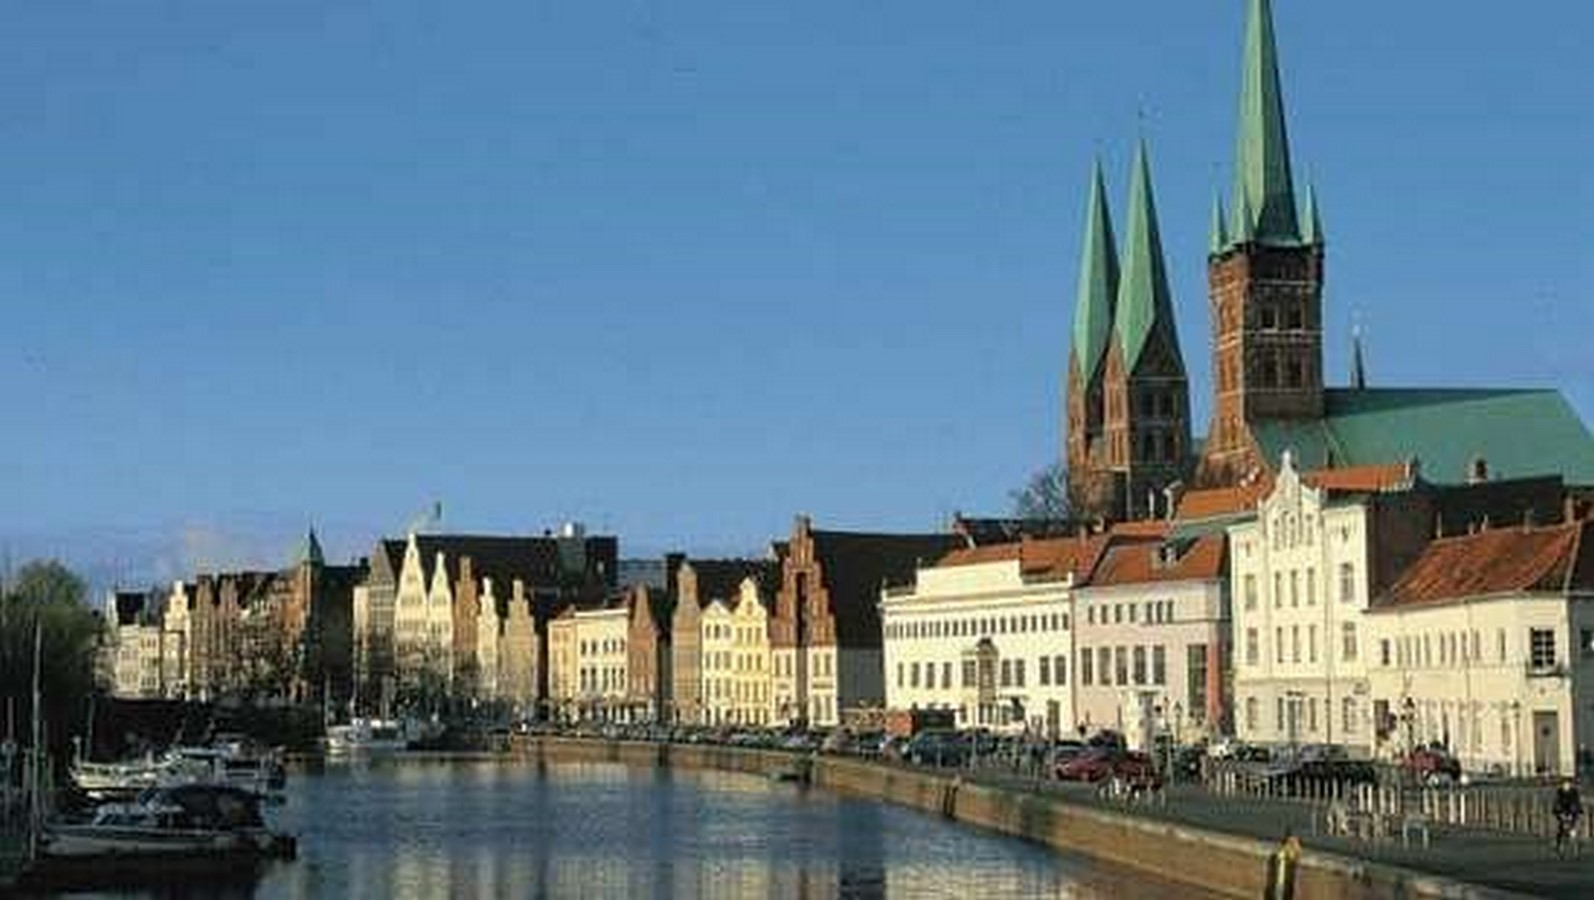 Architecture of Cities: Hanseatic City of Lübeck - Sheet2